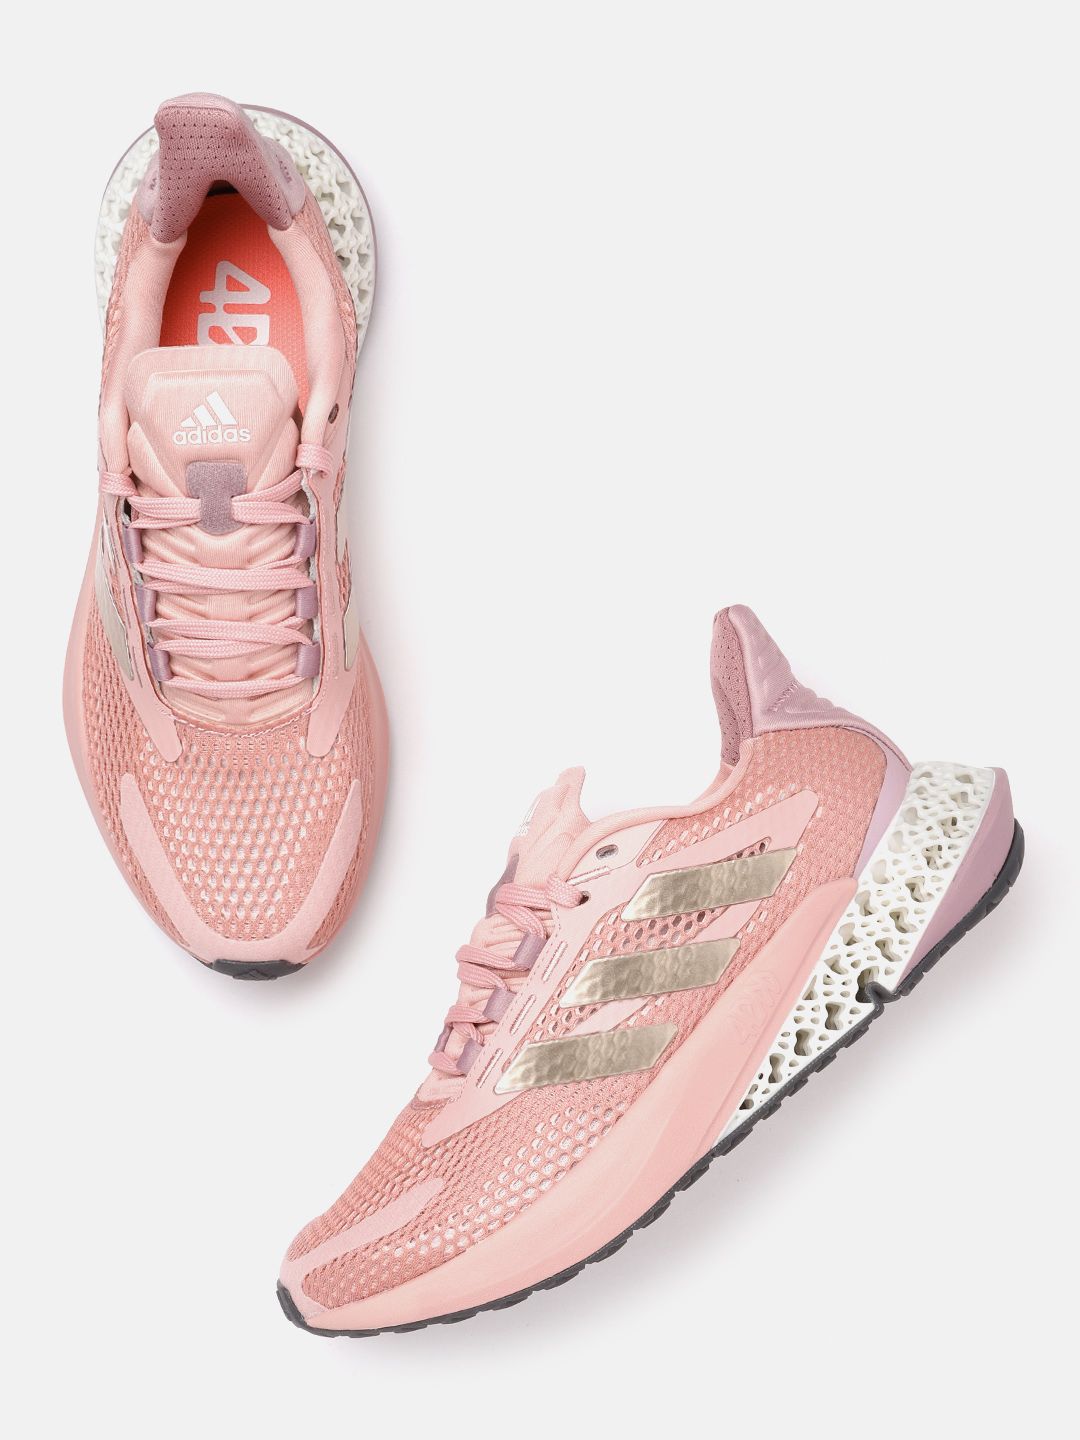 ADIDAS Women Peach-Coloured 4D FWD Pulse Sustainable Running Shoes Price in India